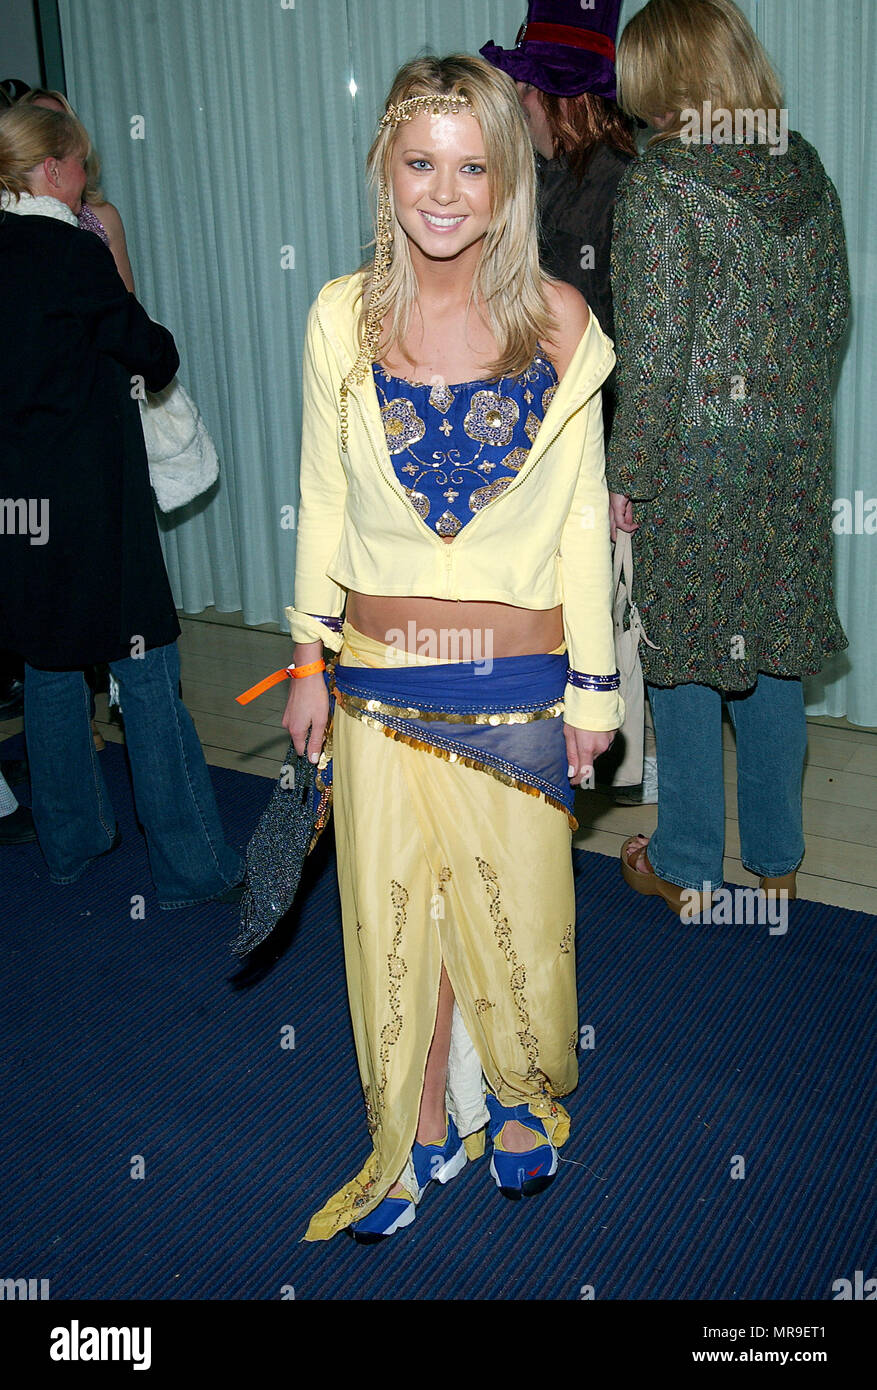 Tara Reid arriving at ' A Halloween 70' Style  ' at the Sky Bar, the Mondrian in Los Angeles. October 31, 2002. ReidTara05A Red Carpet Event, Vertical, USA, Film Industry, Celebrities,  Photography, Bestof, Arts Culture and Entertainment, Topix Celebrities fashion /  Vertical, Best of, Event in Hollywood Life - California,  Red Carpet and backstage, USA, Film Industry, Celebrities,  movie celebrities, TV celebrities, Music celebrities, Photography, Bestof, Arts Culture and Entertainment,  Topix, vertical, one person,, from the year , 2002, inquiry tsuni@Gamma-USA.com Fashion - Full Length Stock Photo